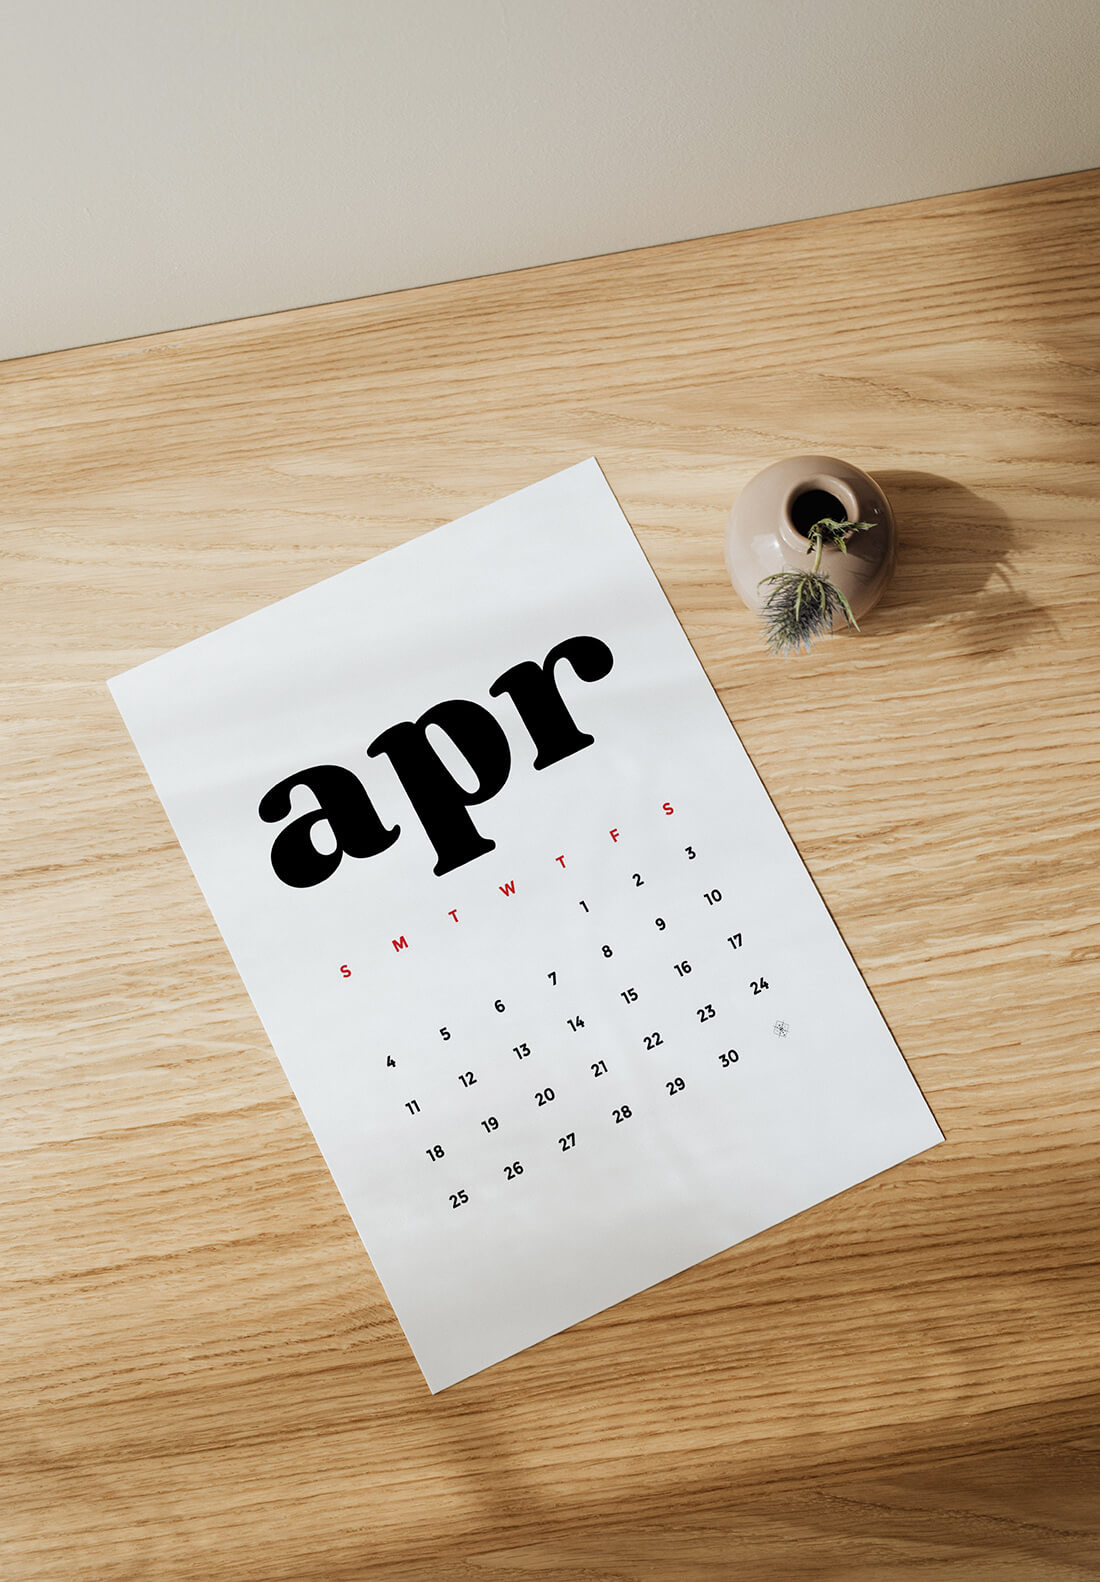 Little Gold Pixel • Free Printable 2021 Calendar • Download and print today! • Picture of the April 2021 printout on a wooden desktop, covered in shadows.